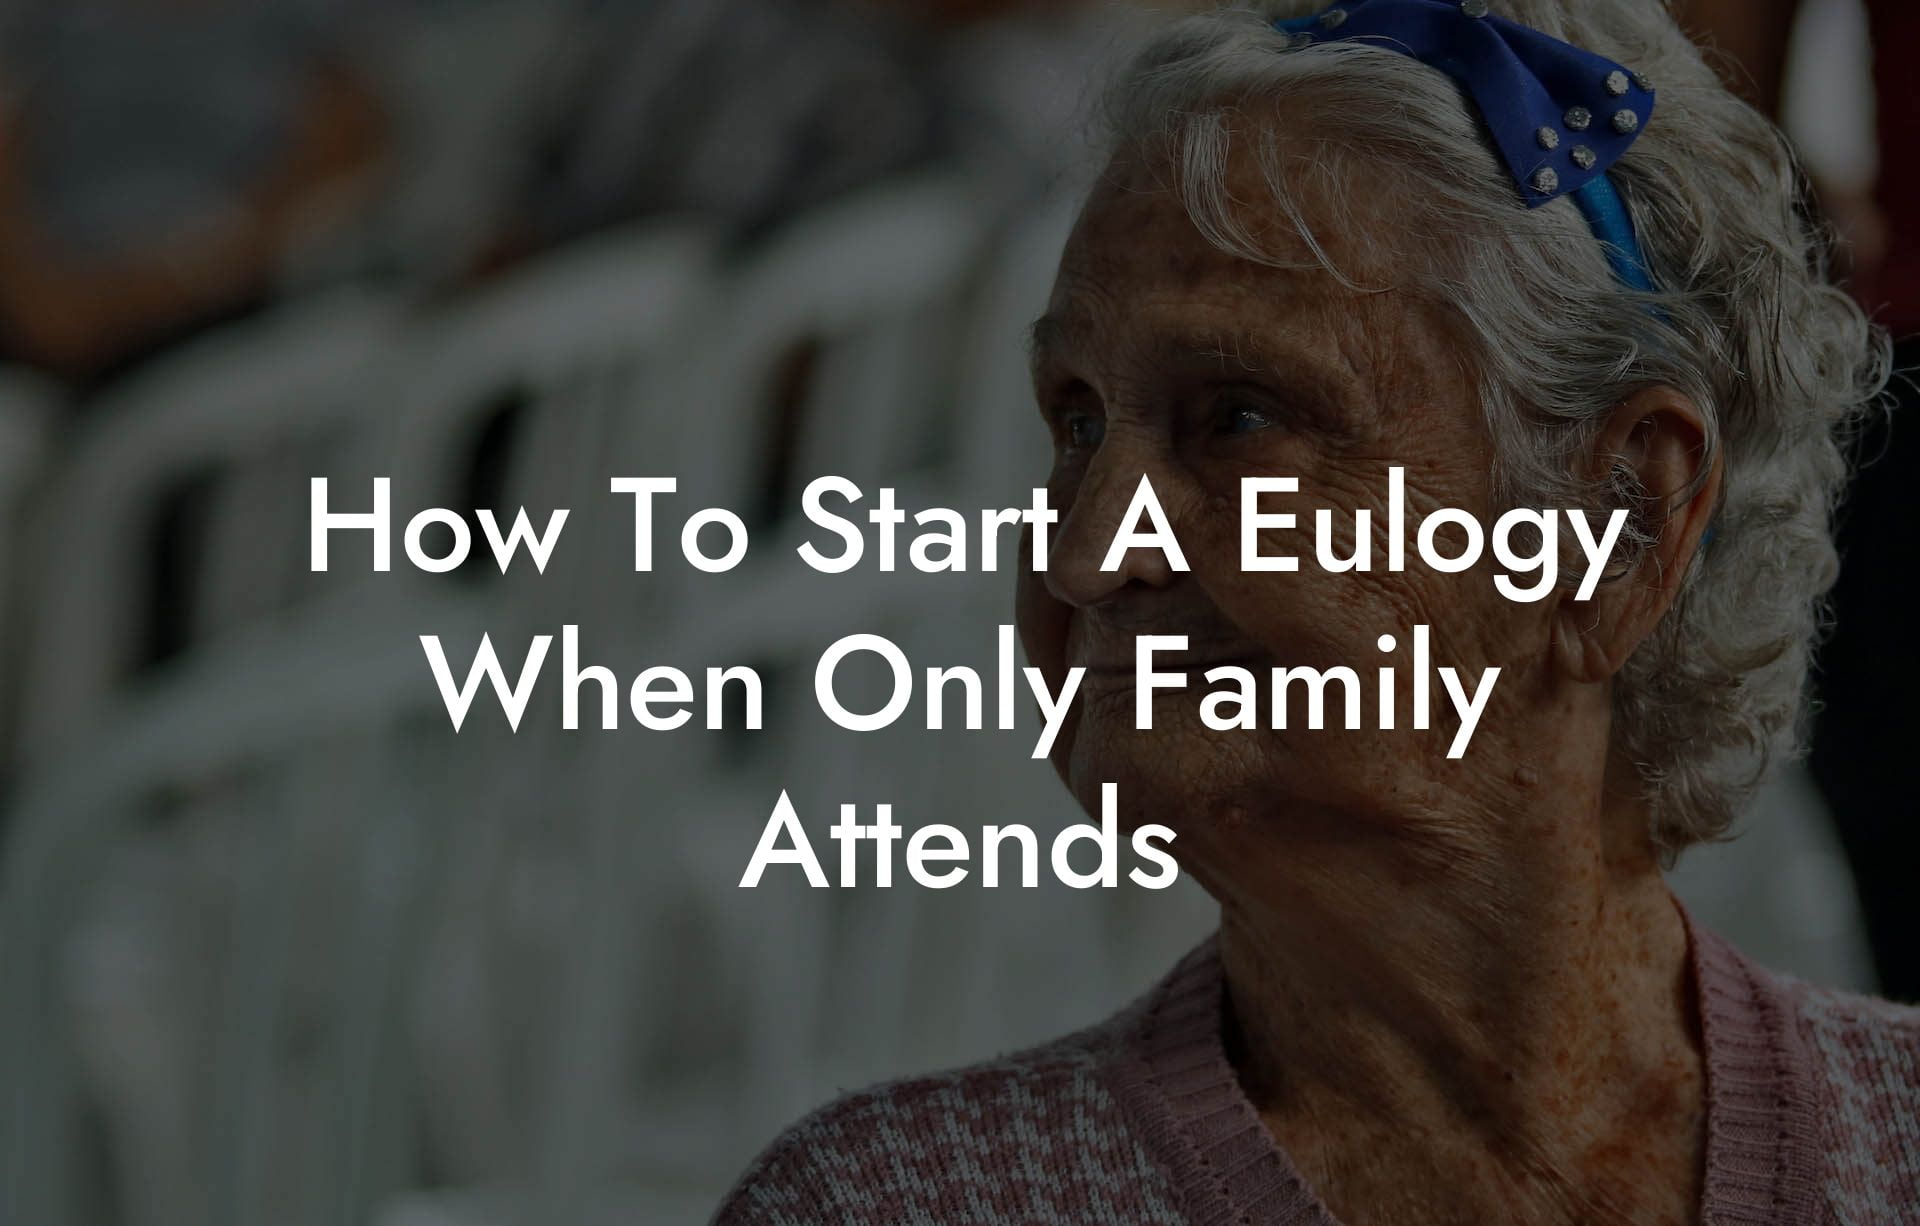 How To Start A Eulogy When Only Family Attends